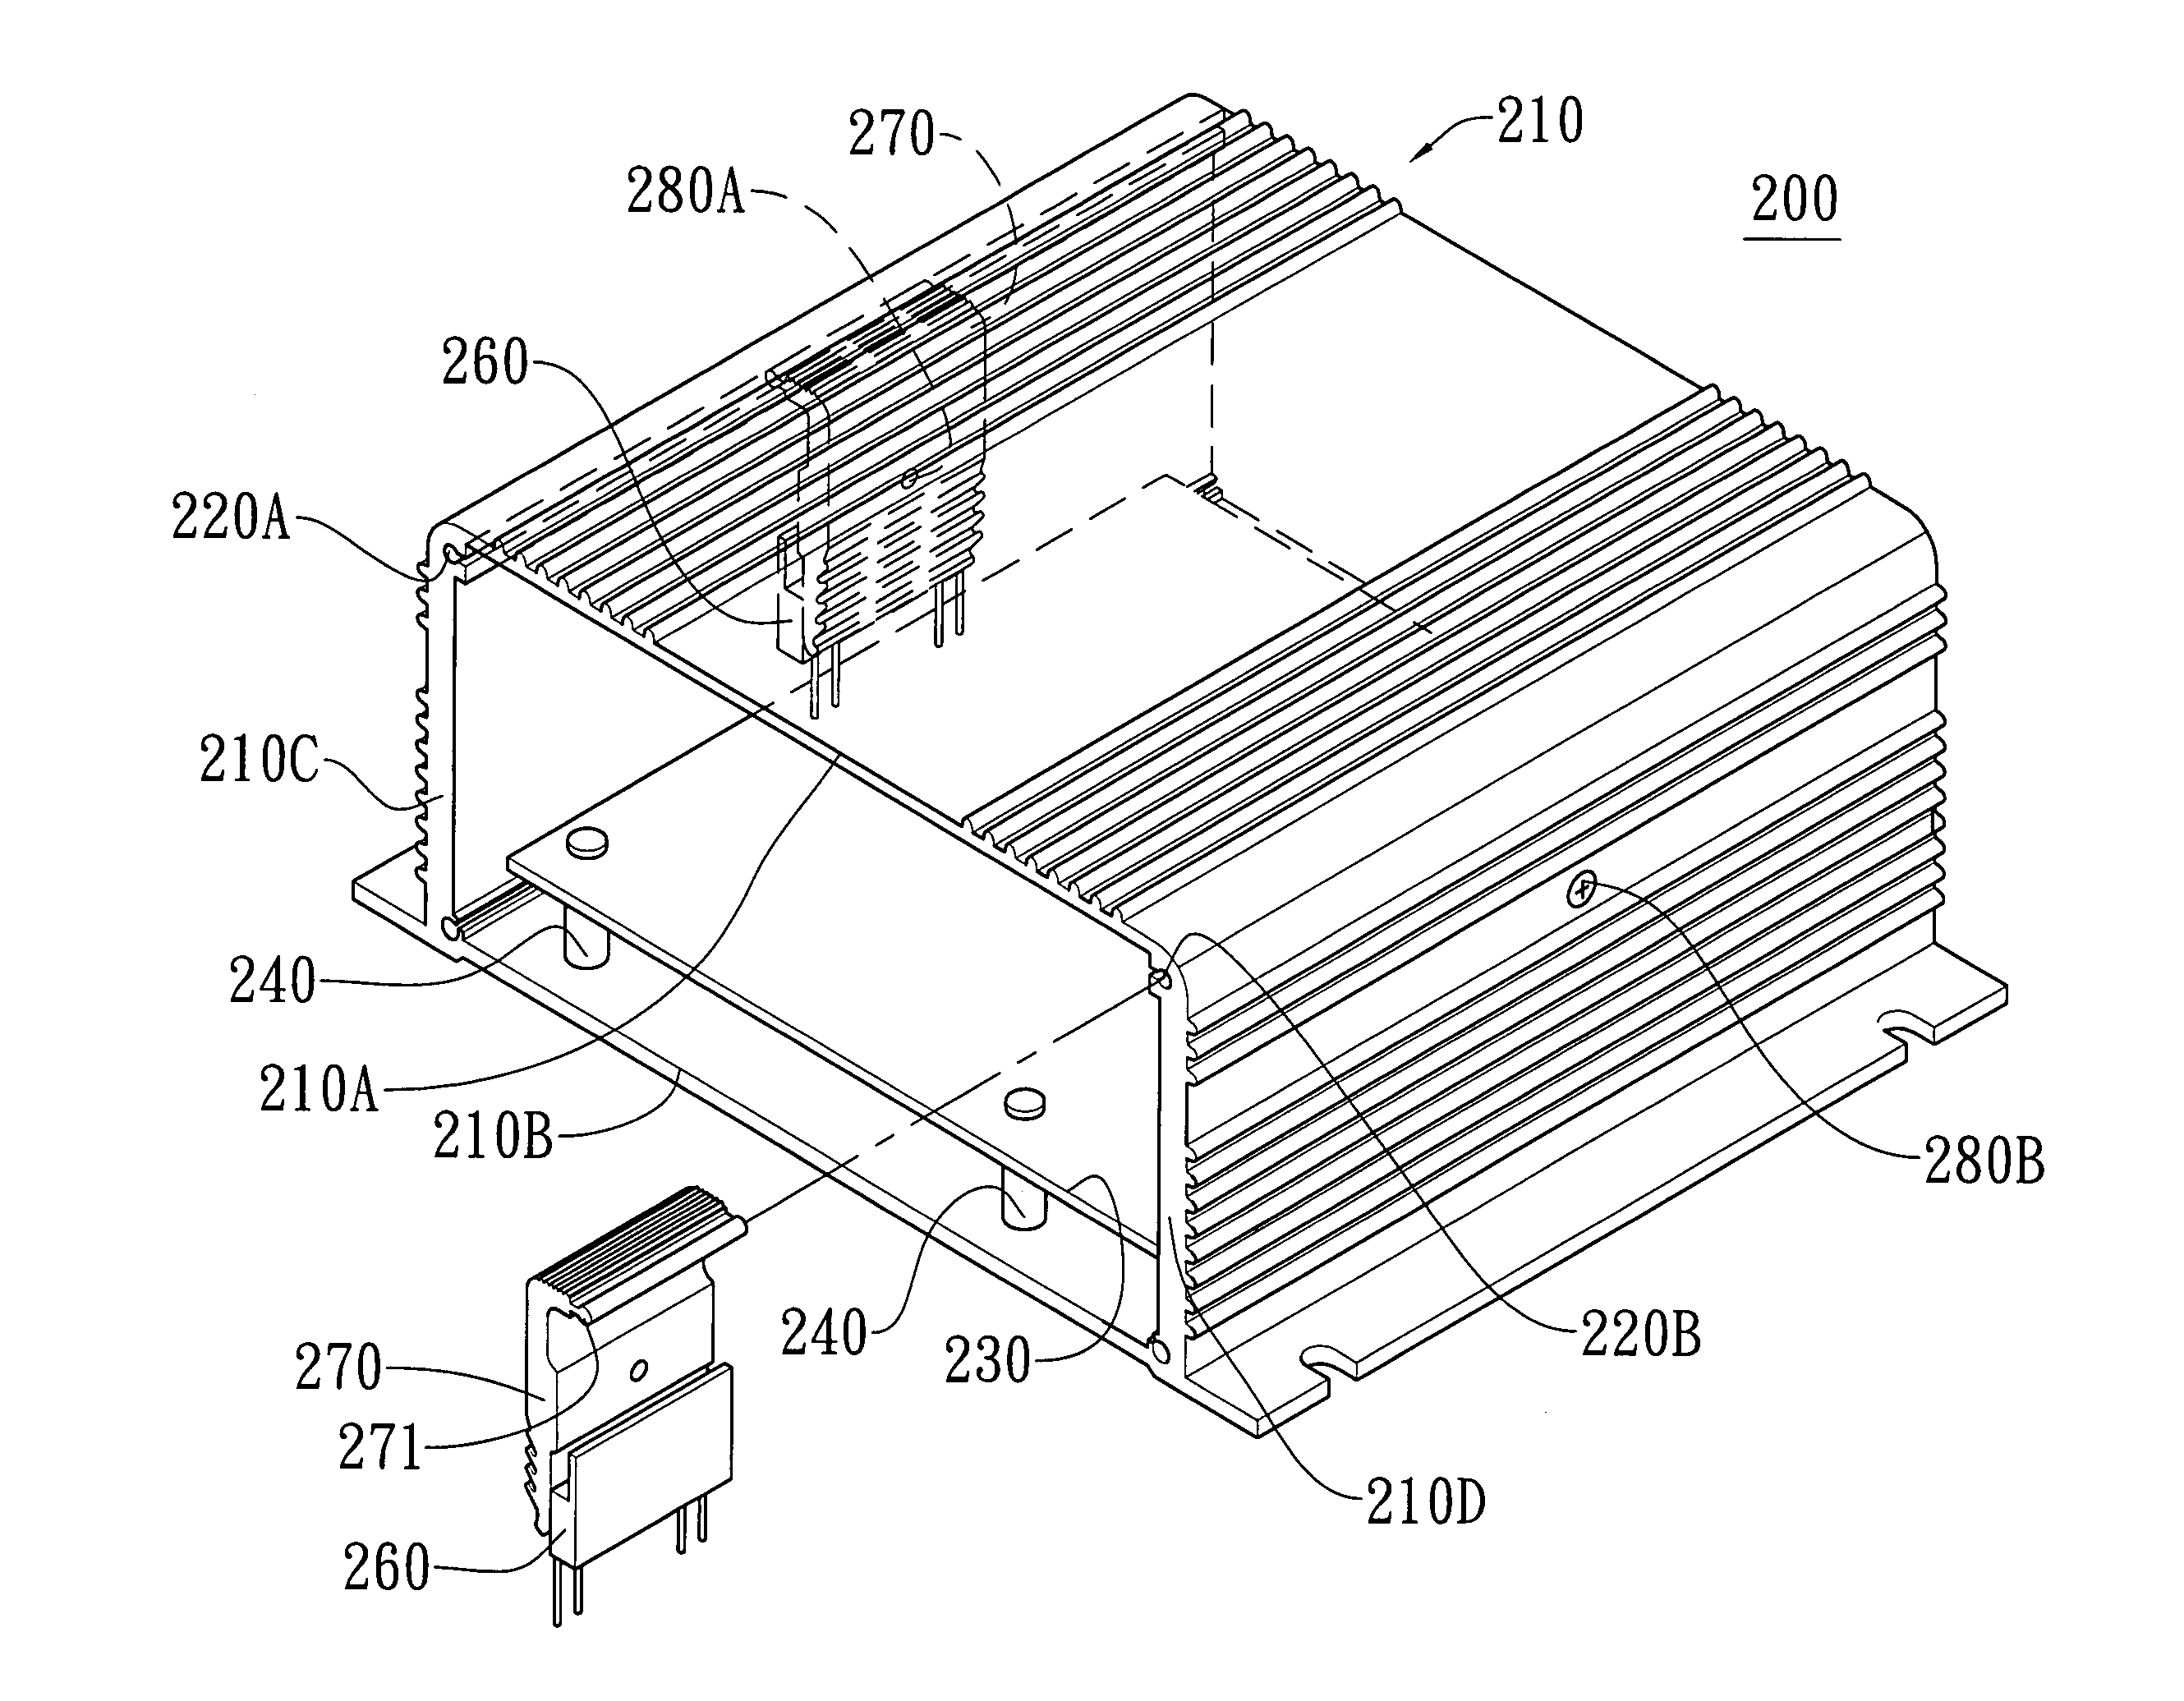 Combination of inverter casing and heat sink member